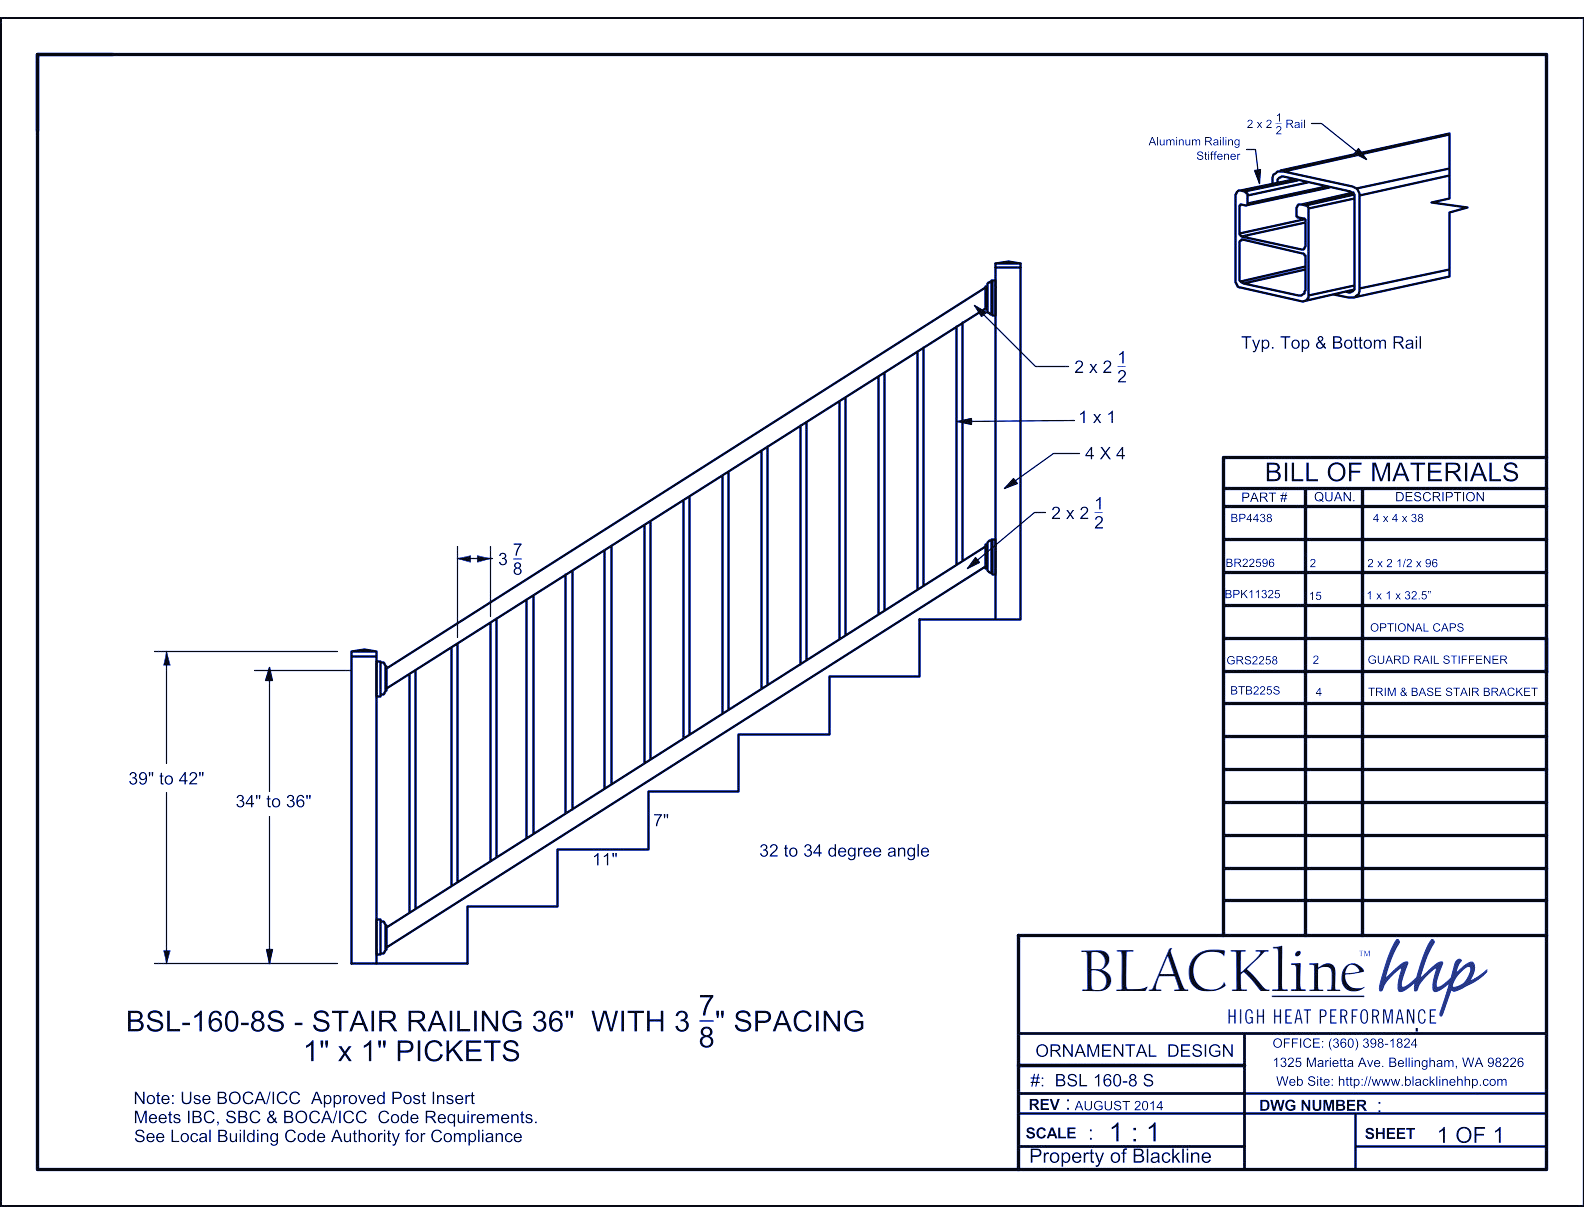 BSL161-6: Railing 36" with 3 7/8" Spacing - 1" x 1" Pickets